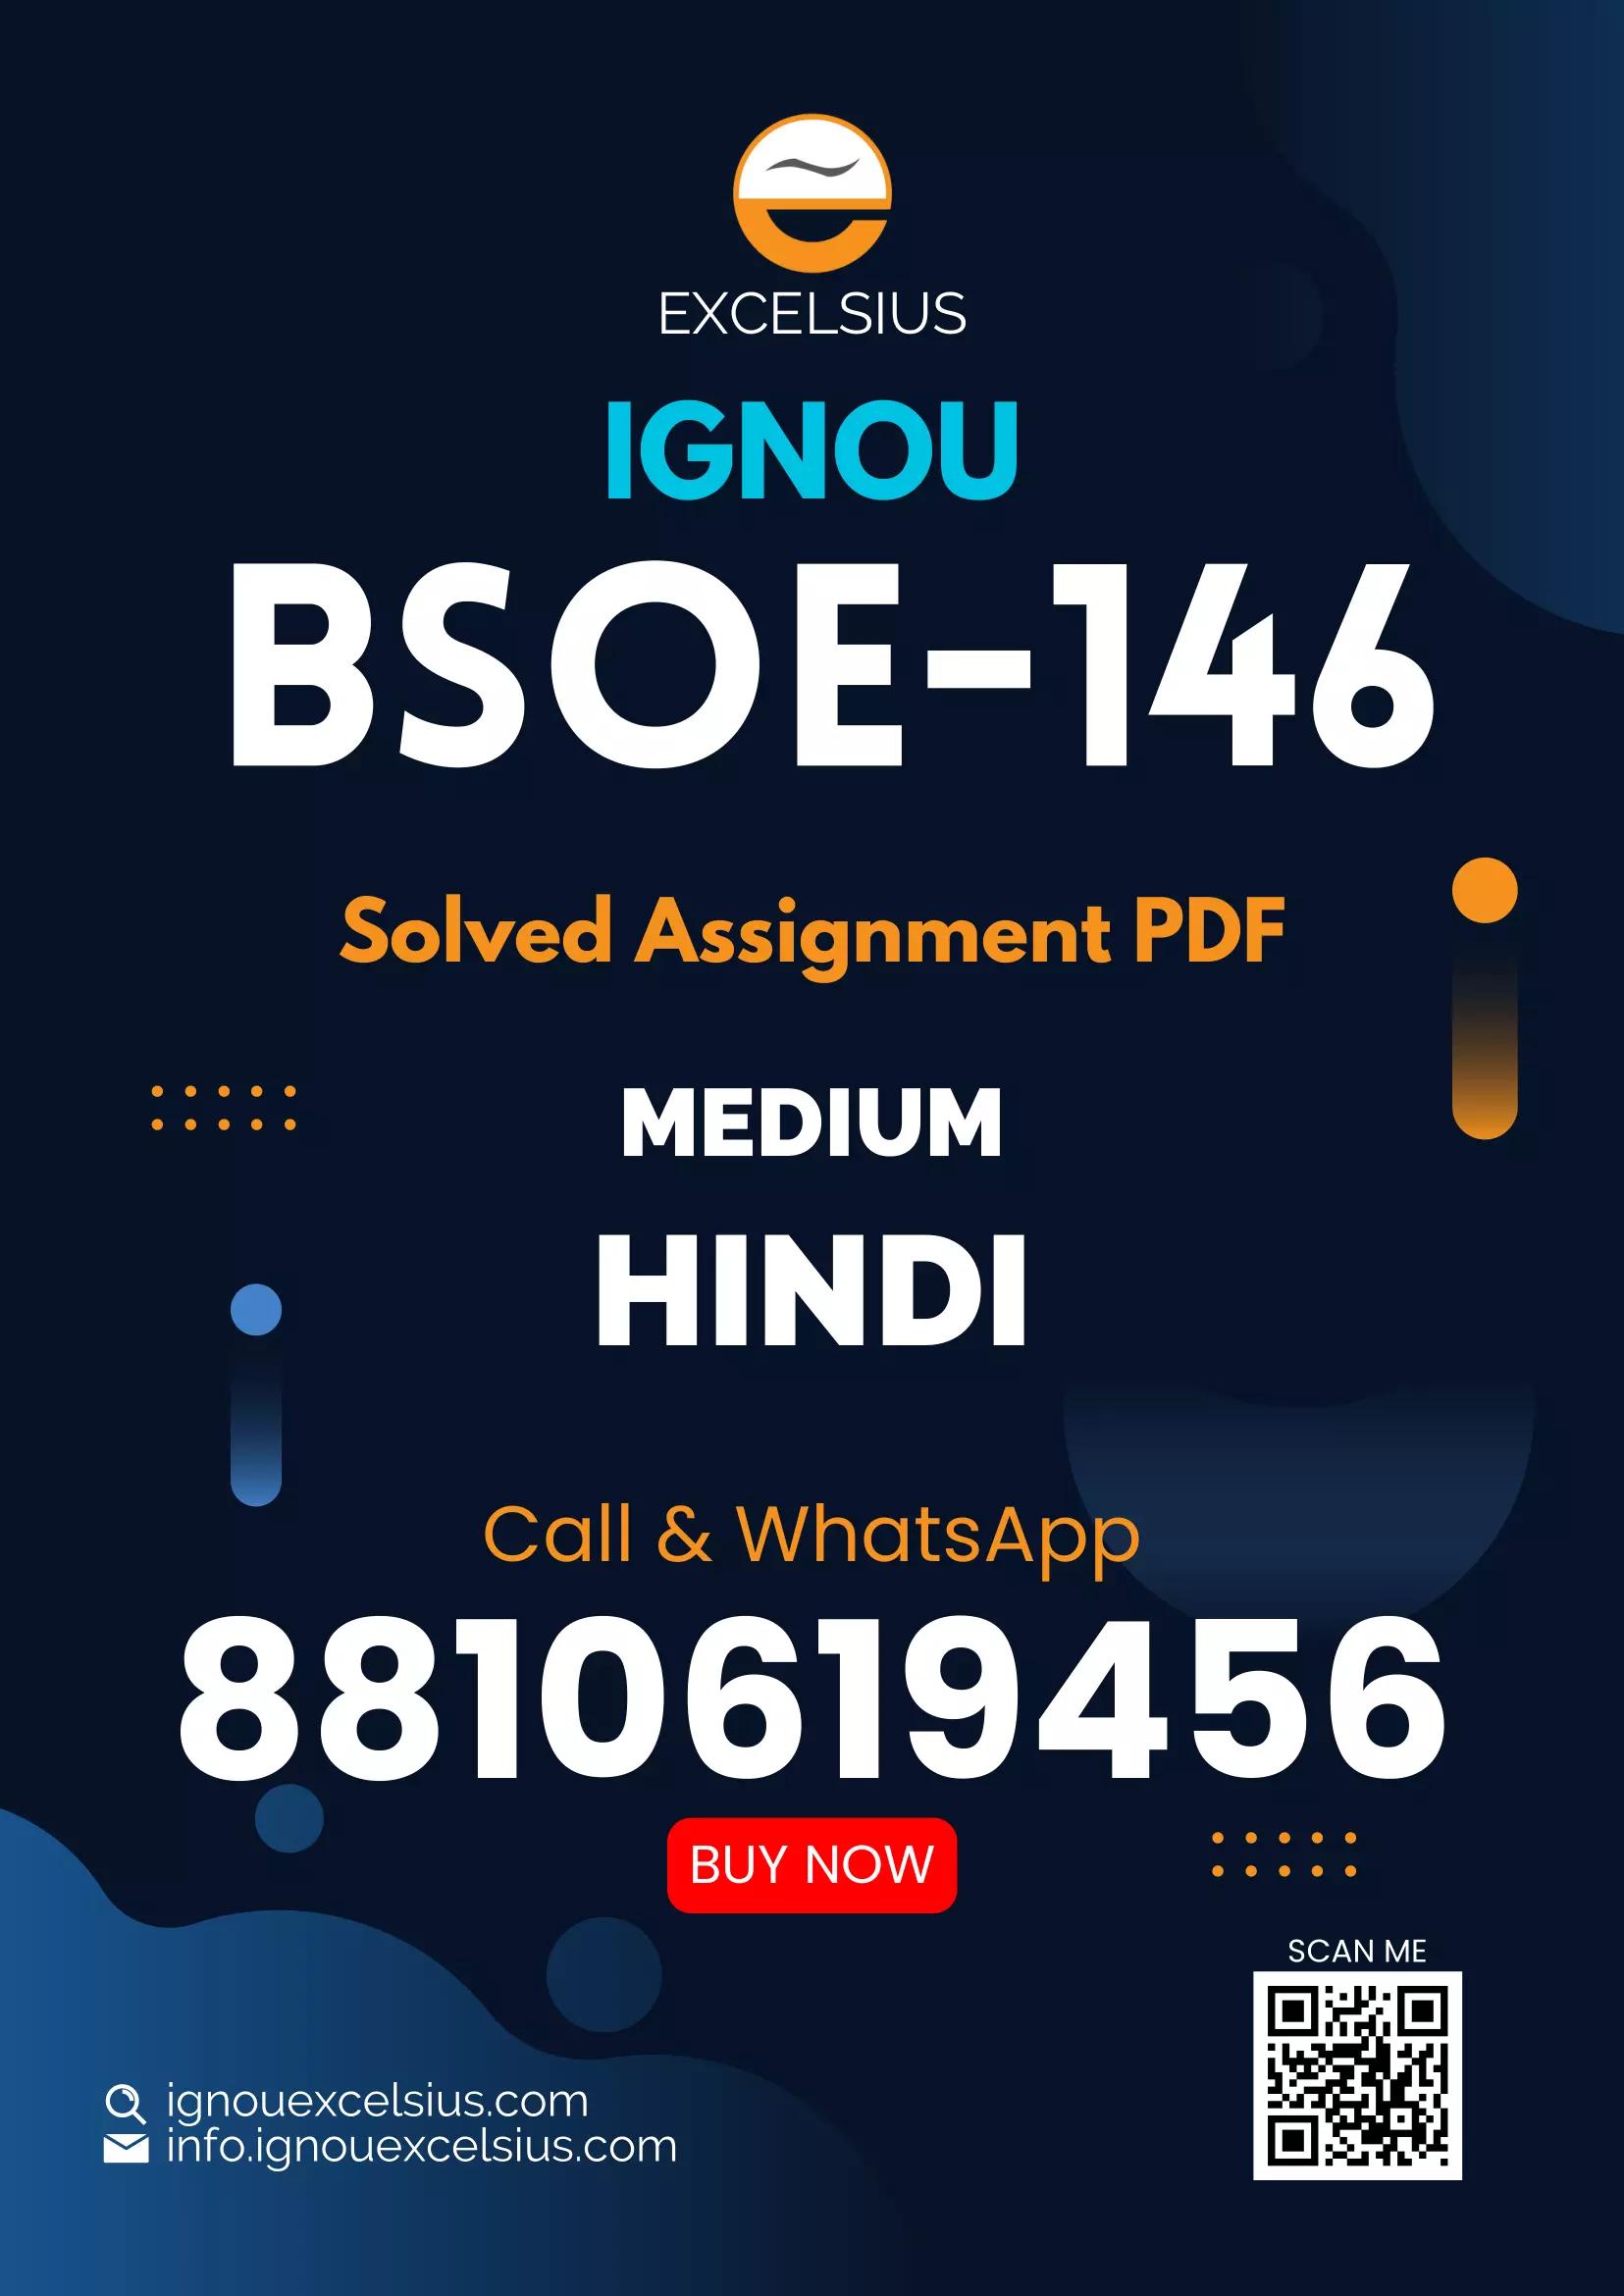 IGNOU BSOE-146 - Marriage, Family and Kinship, Latest Solved Assignment-July 2023 - January 2024